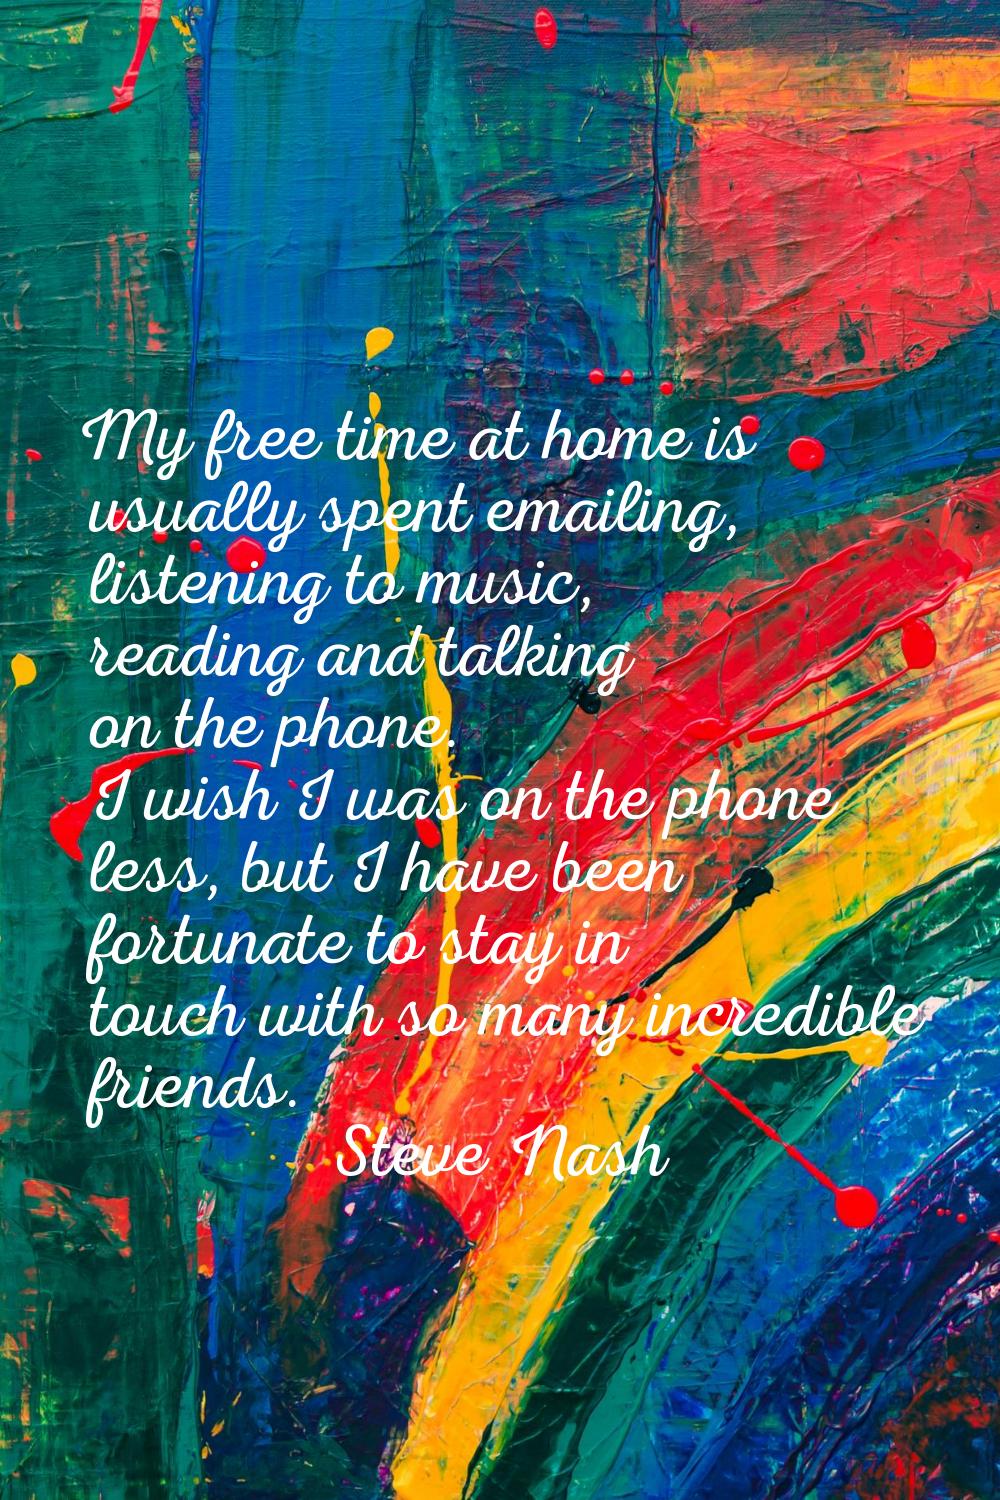 My free time at home is usually spent emailing, listening to music, reading and talking on the phon